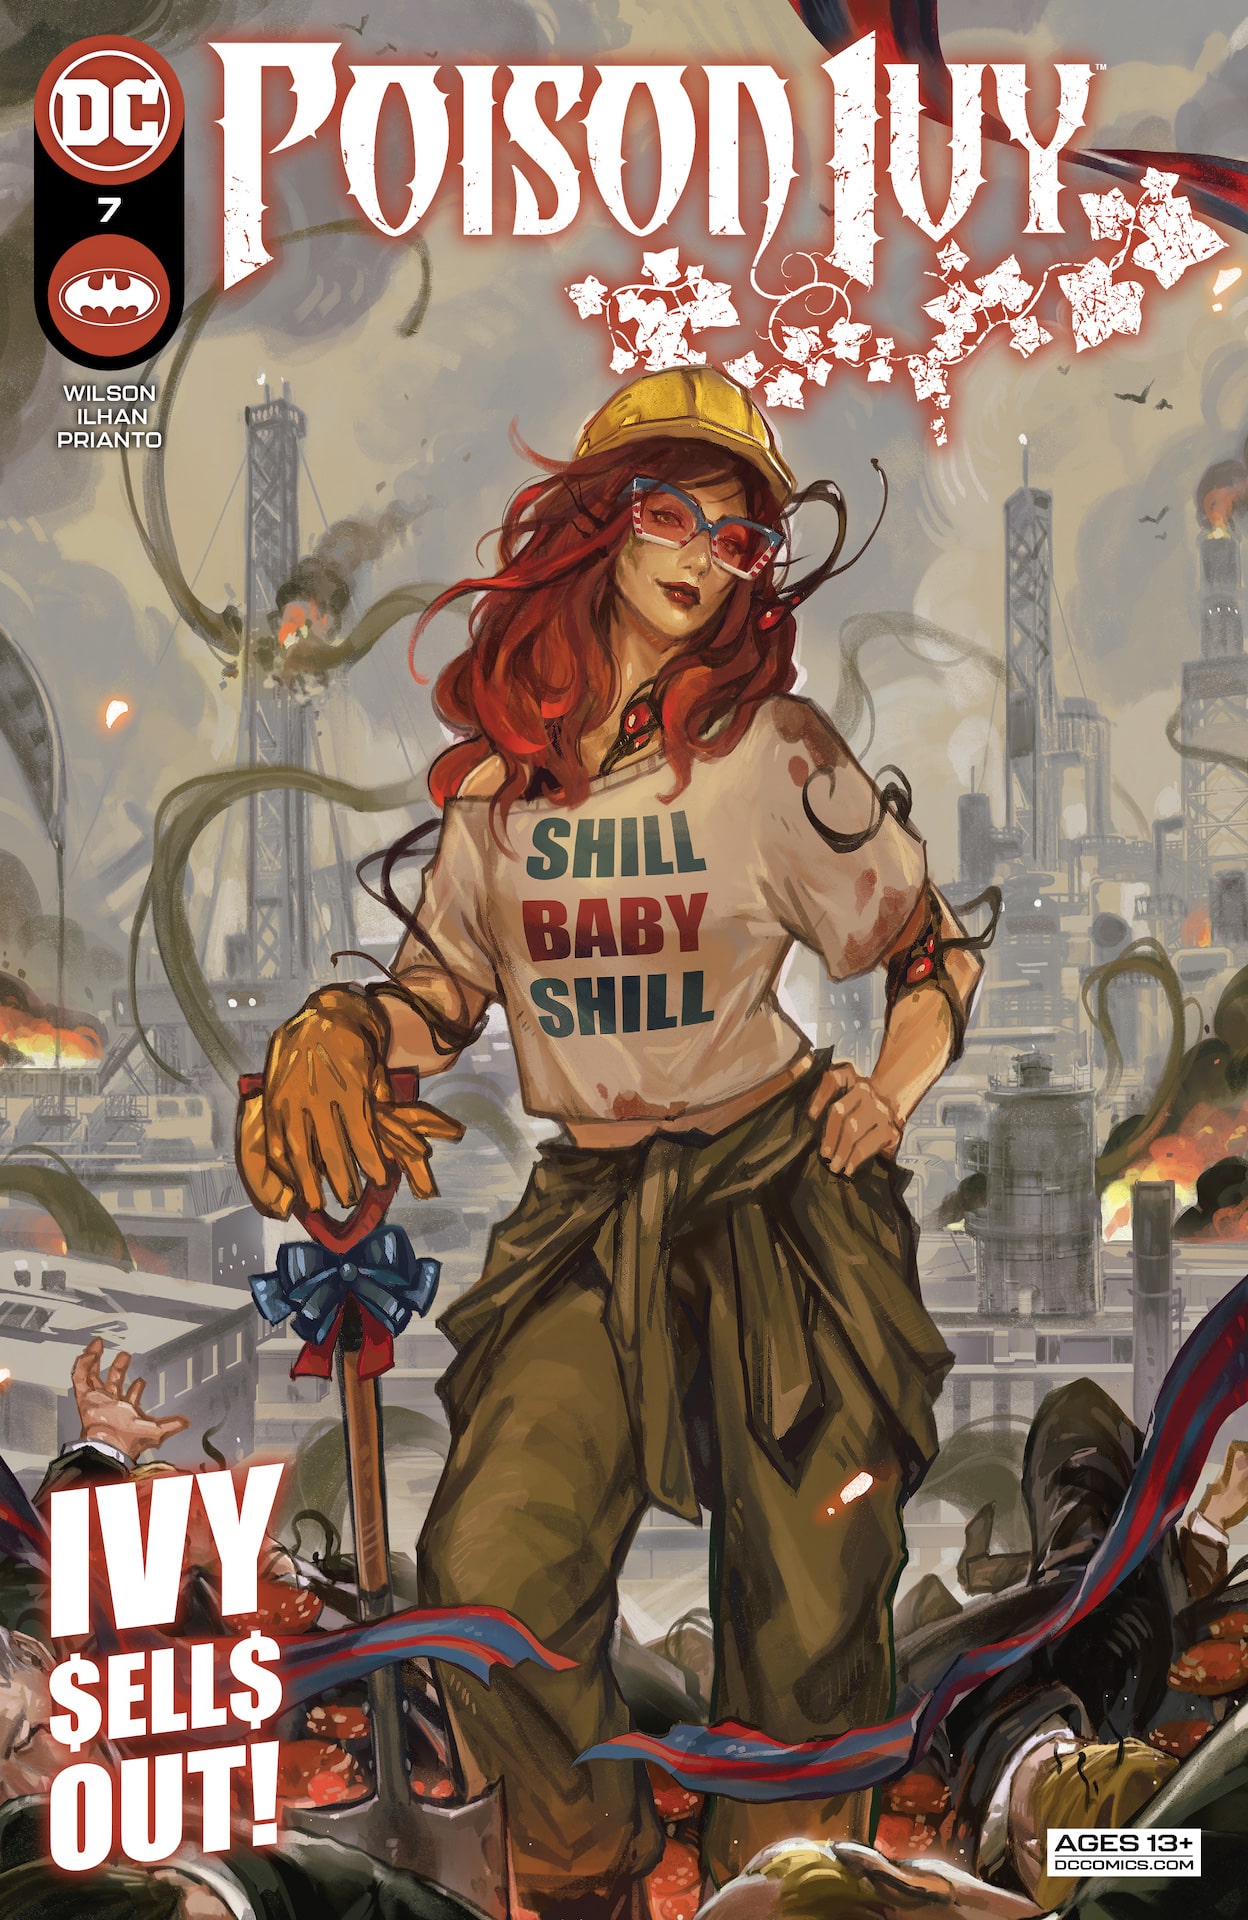 DC Preview: Poison Ivy #7